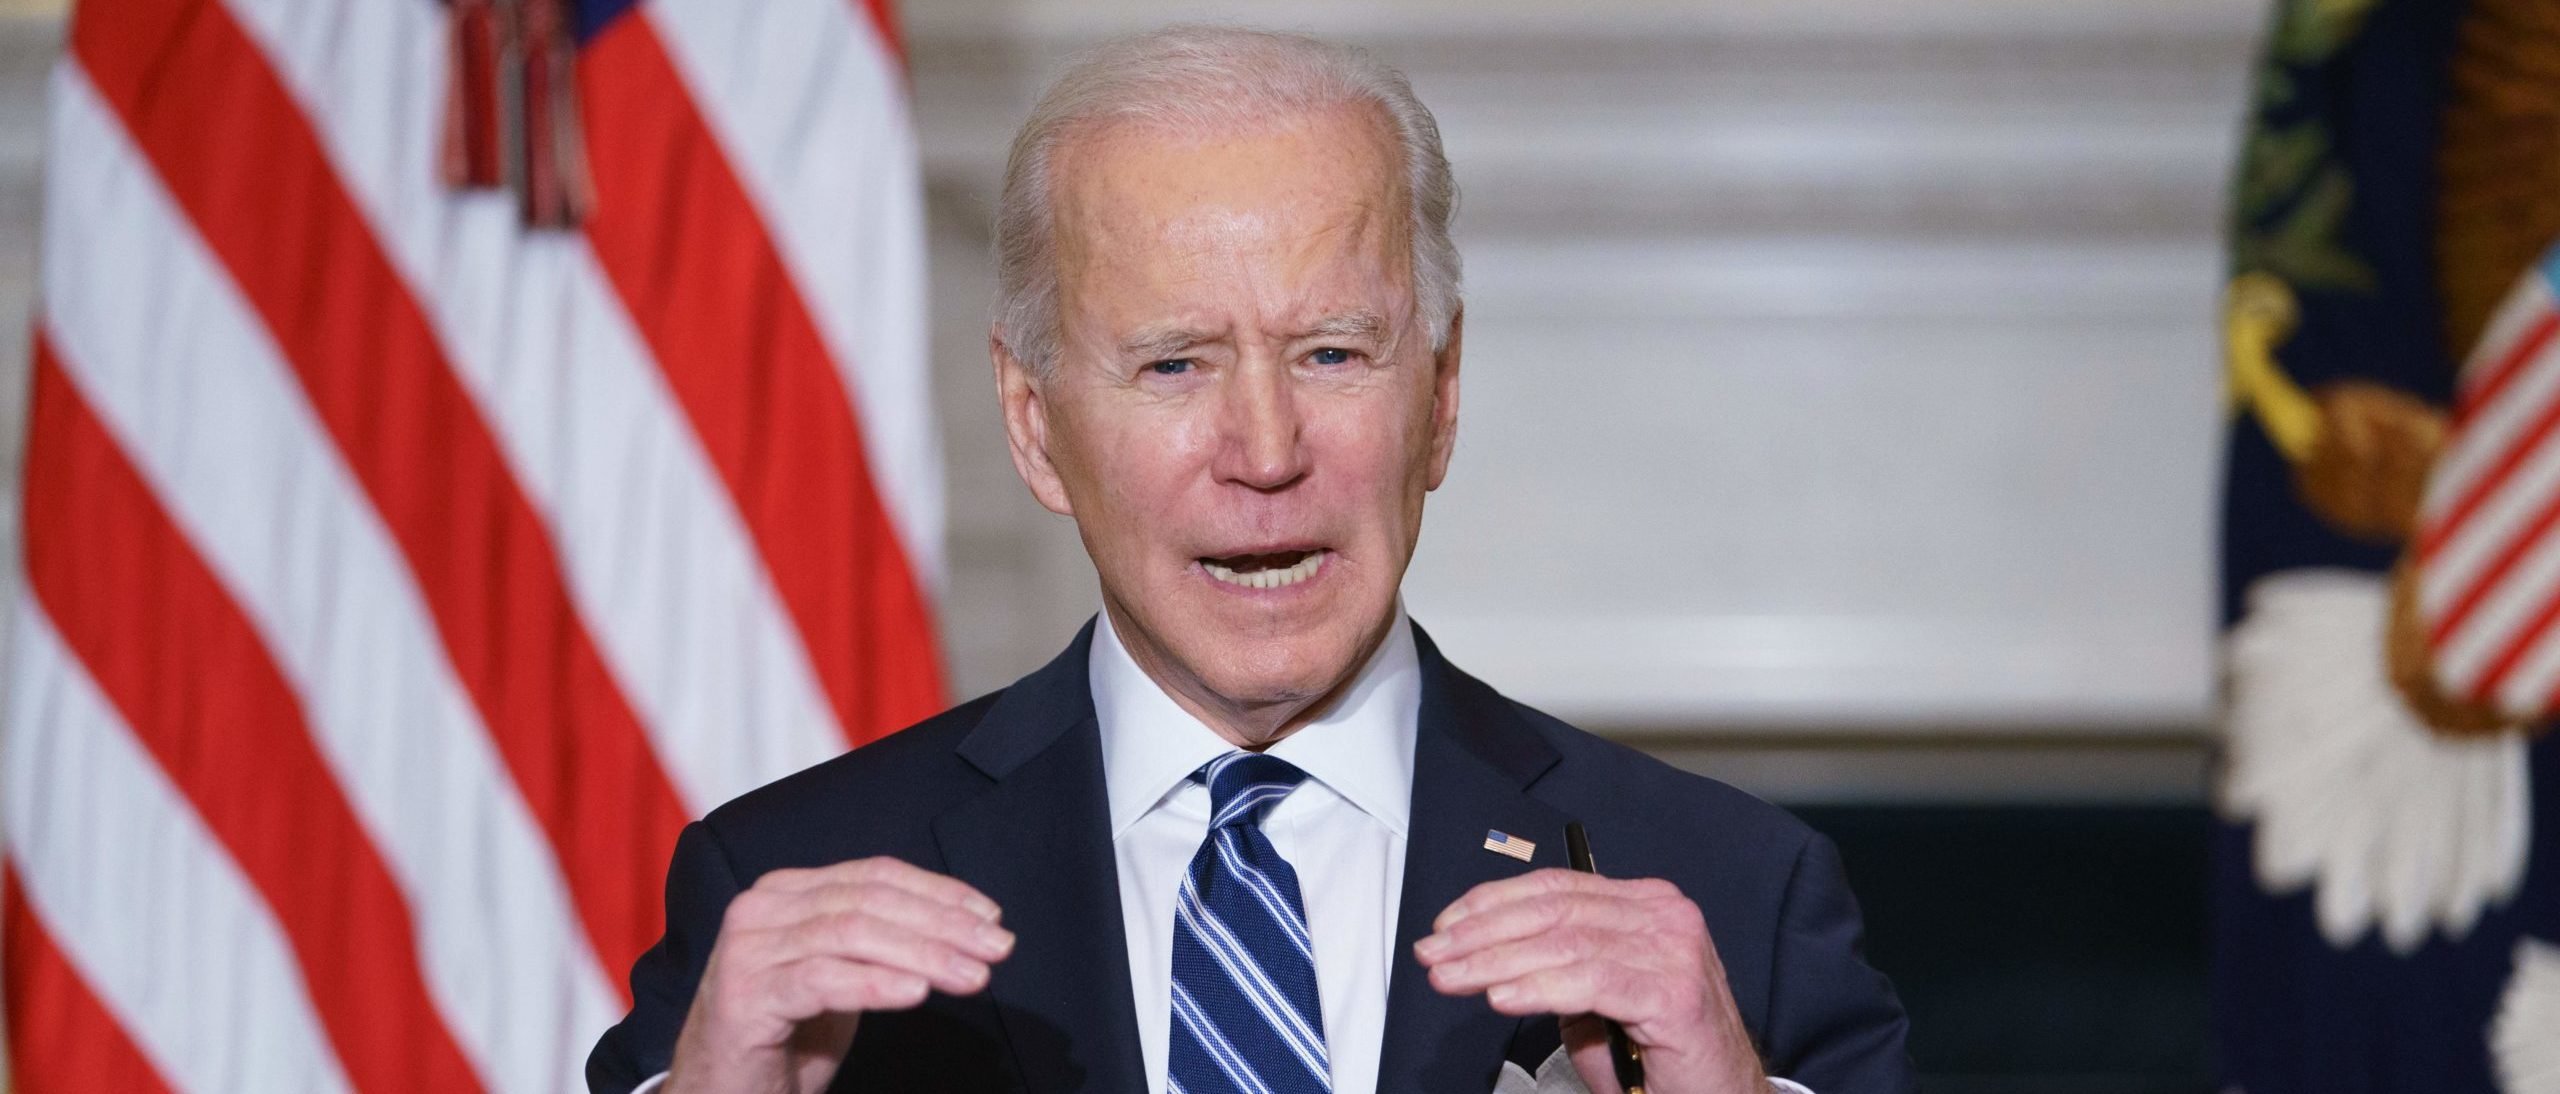 Republicans Question Biden’s Mental State, Call On Him To Resign Over Afghanistan thumbnail